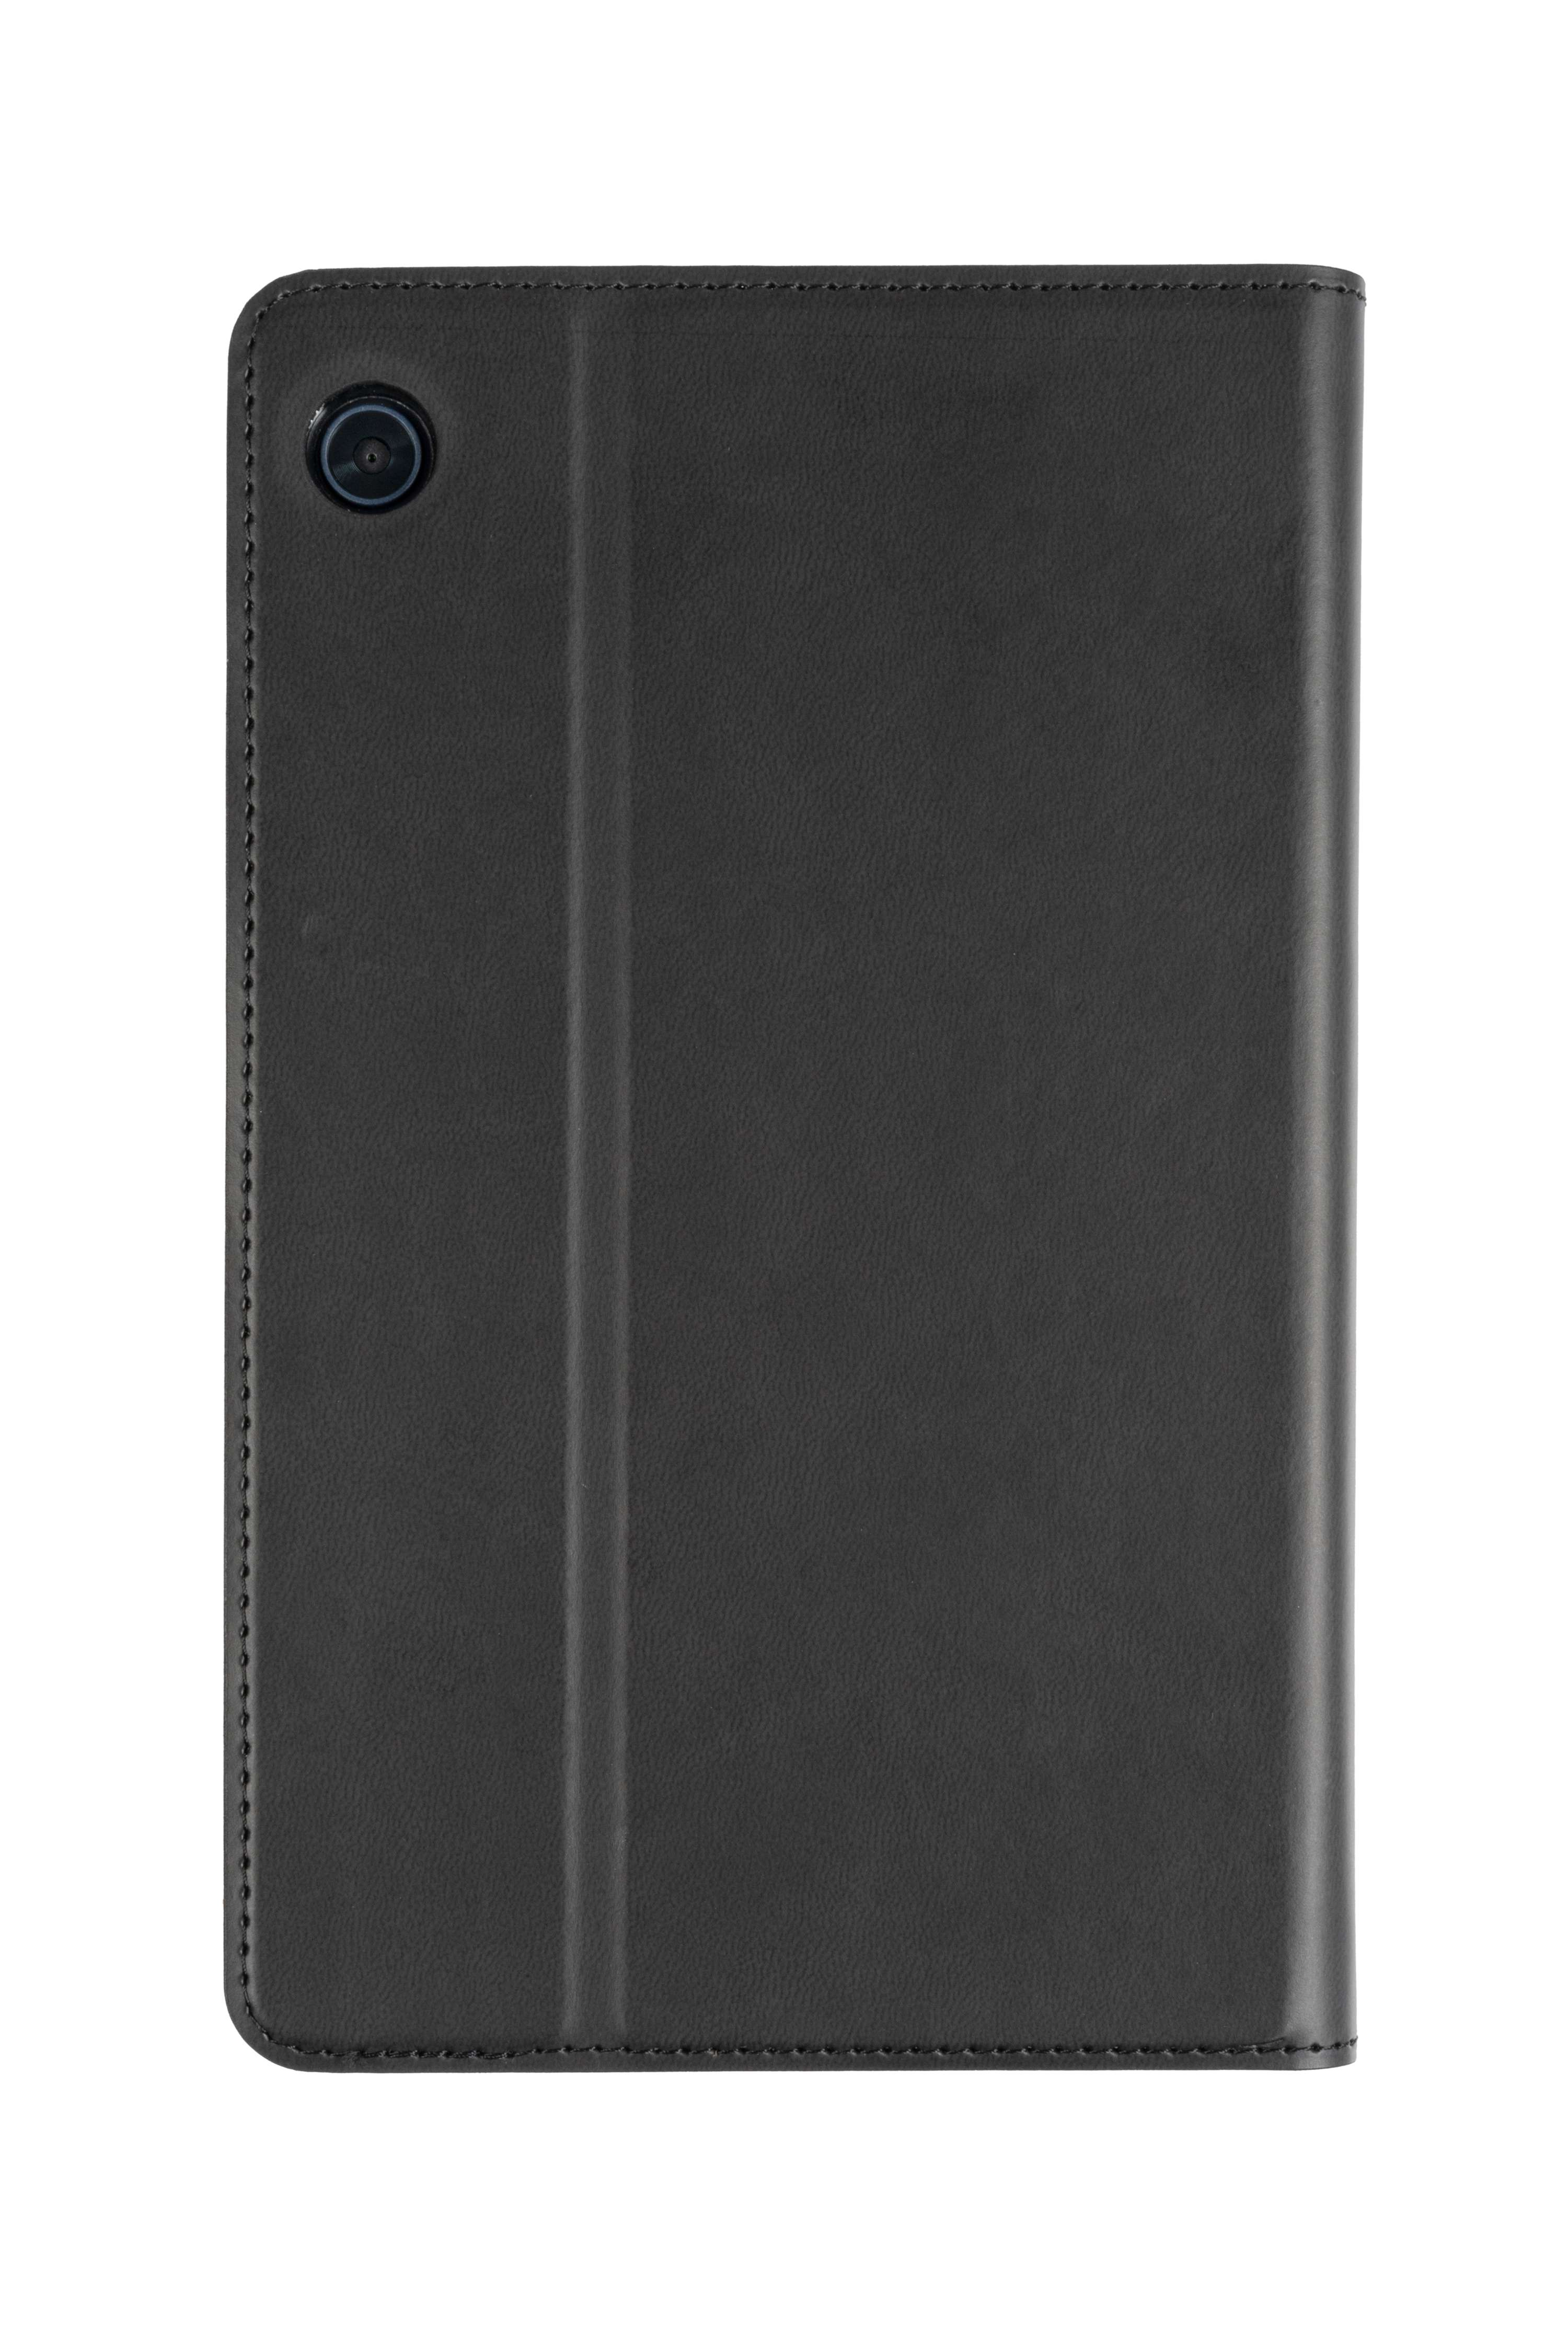 Bookcover COVERS Huawei Easy-Click Hülle 2.0 für Schwarz PU Cover GECKO Tablet Leather,